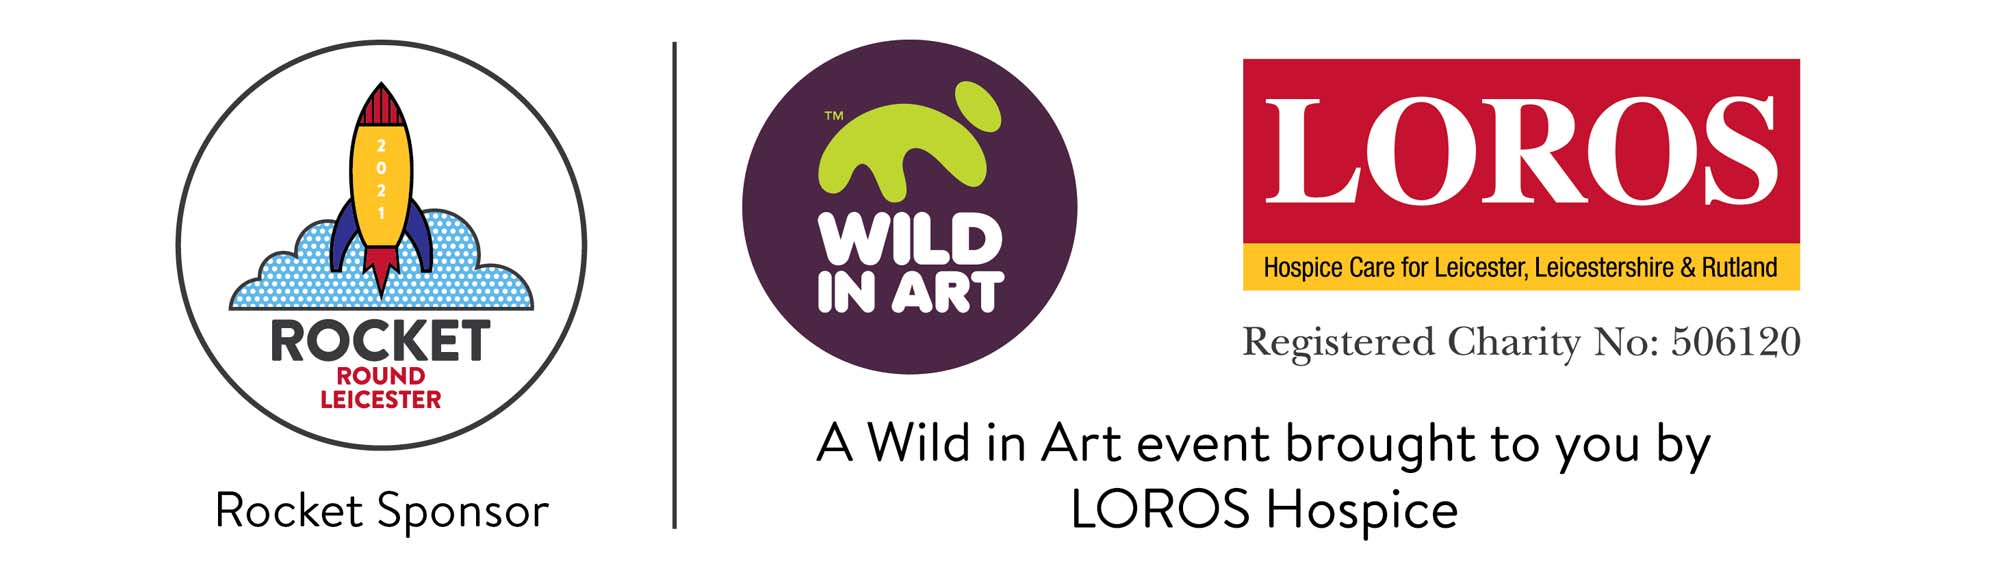 sponsor logos for rocketroundleicester event including rocket leicester, loros and wild in art